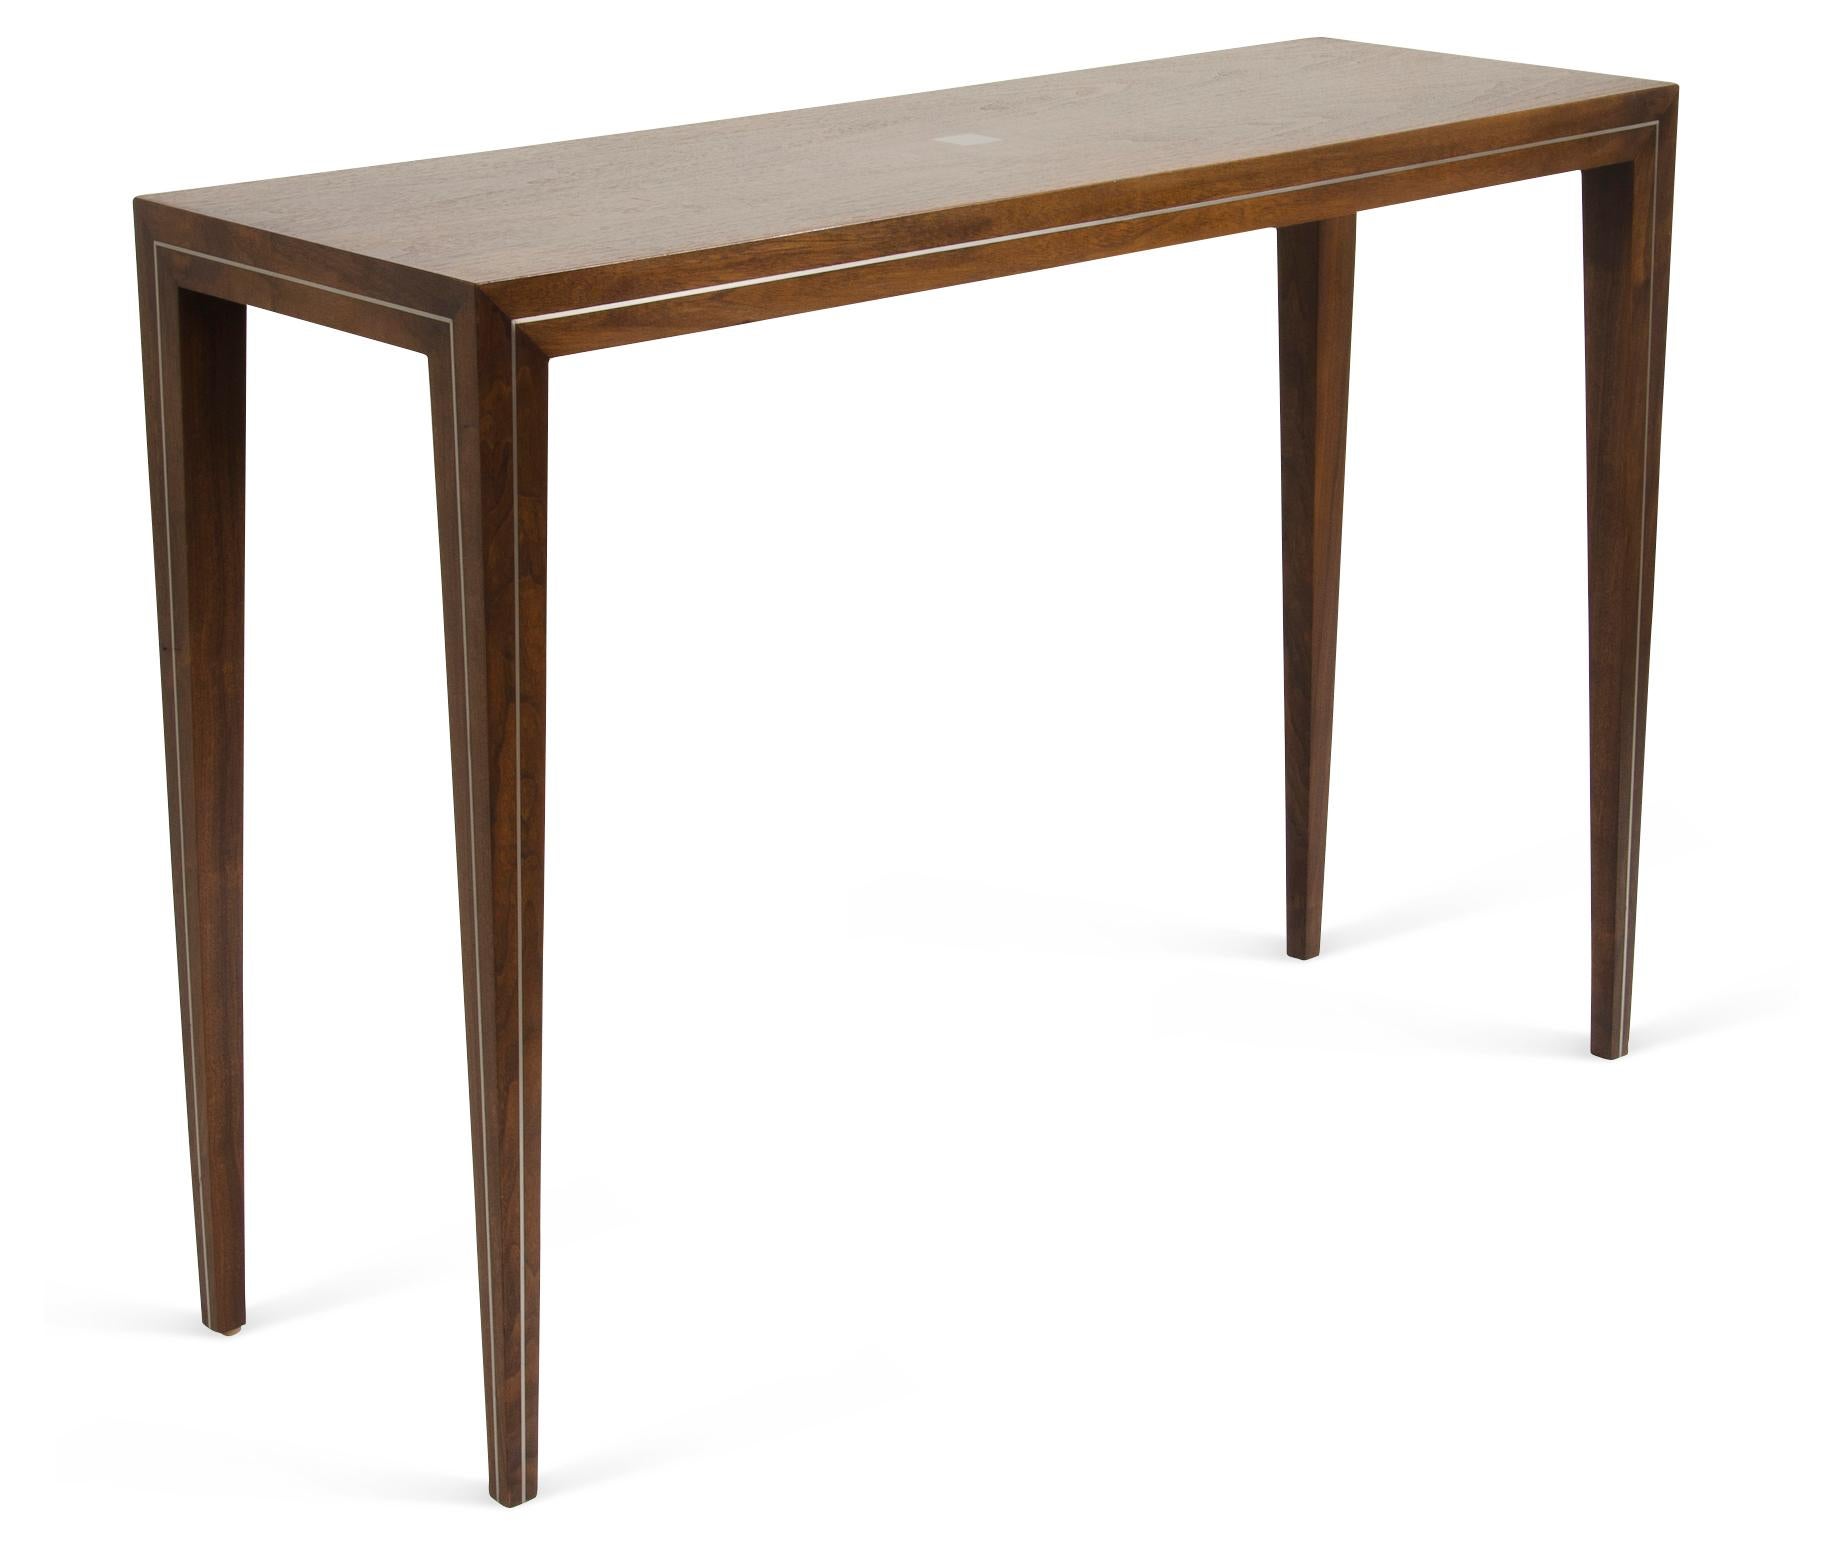 The walnut console is a handcrafted edition, with tapered legs and brass or aluminum inlays, mitred corners and traditional joinery. Custom sizes and finishes available.